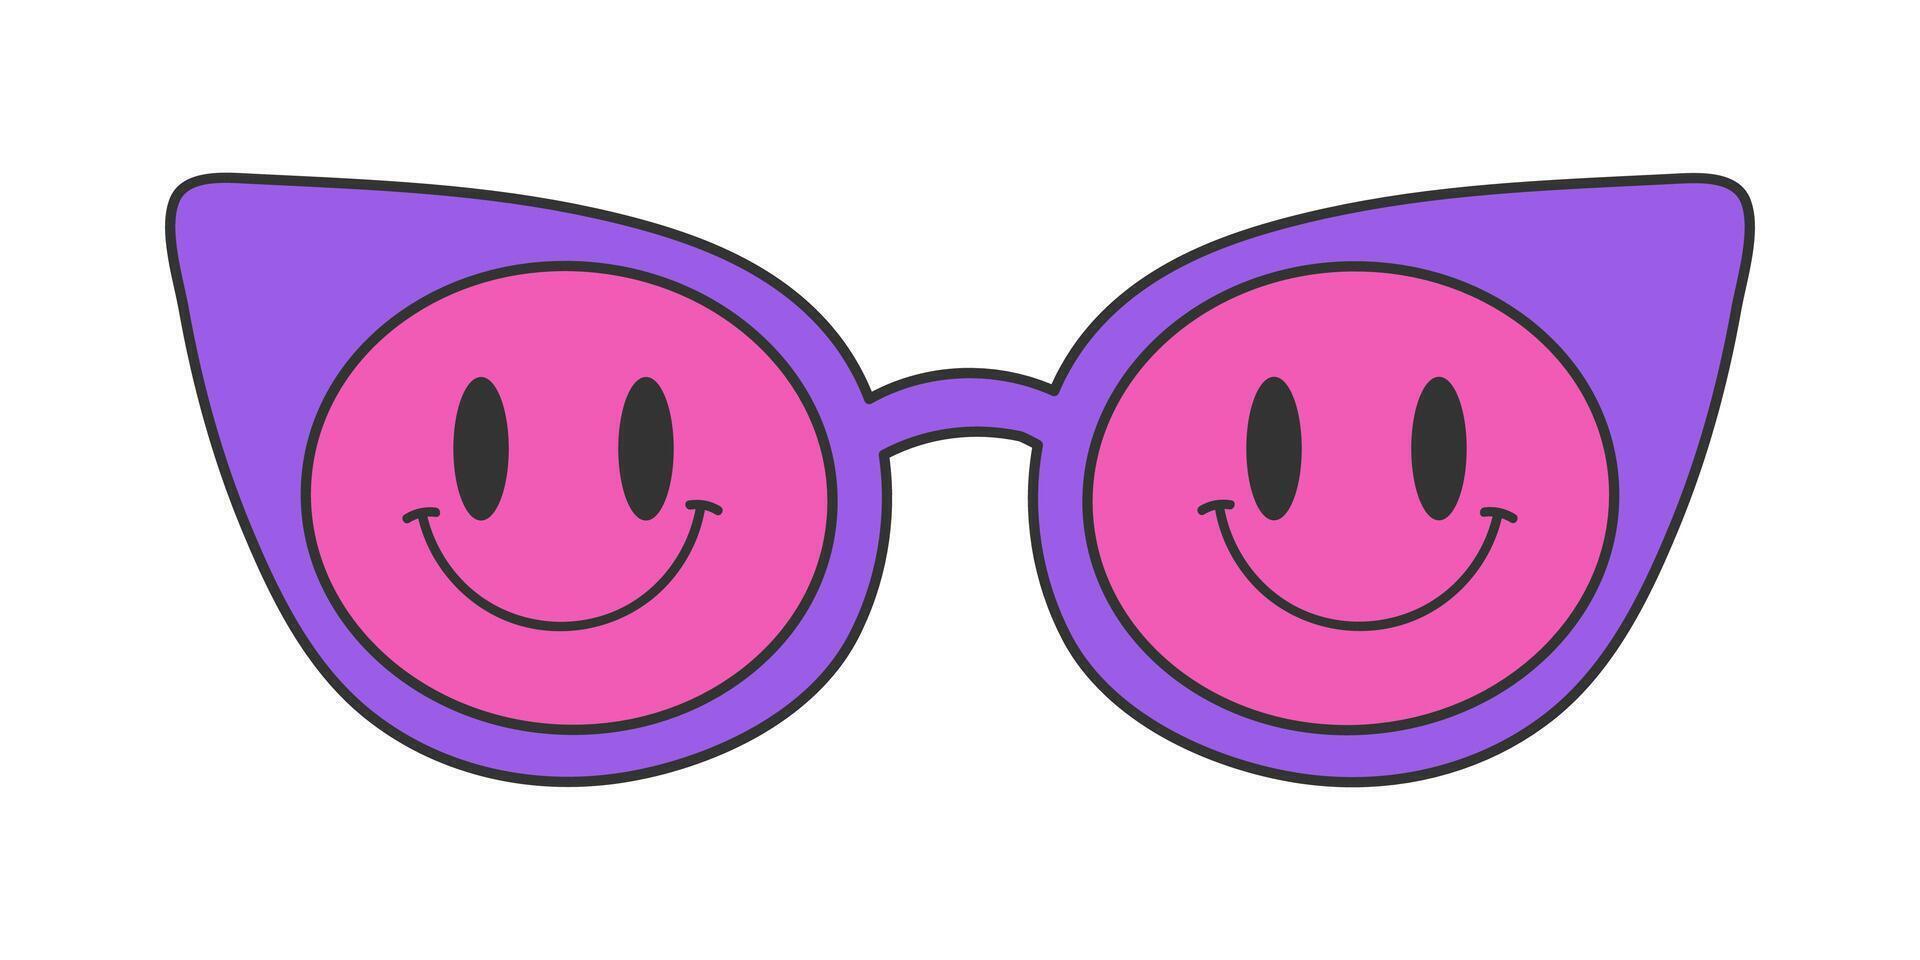 Neon groovy sunglasses on a white background, vintage hippie accessory. Cat eye frame, smile pattern on the glass. Retro sticker, nostalgic vector element in 70s style.